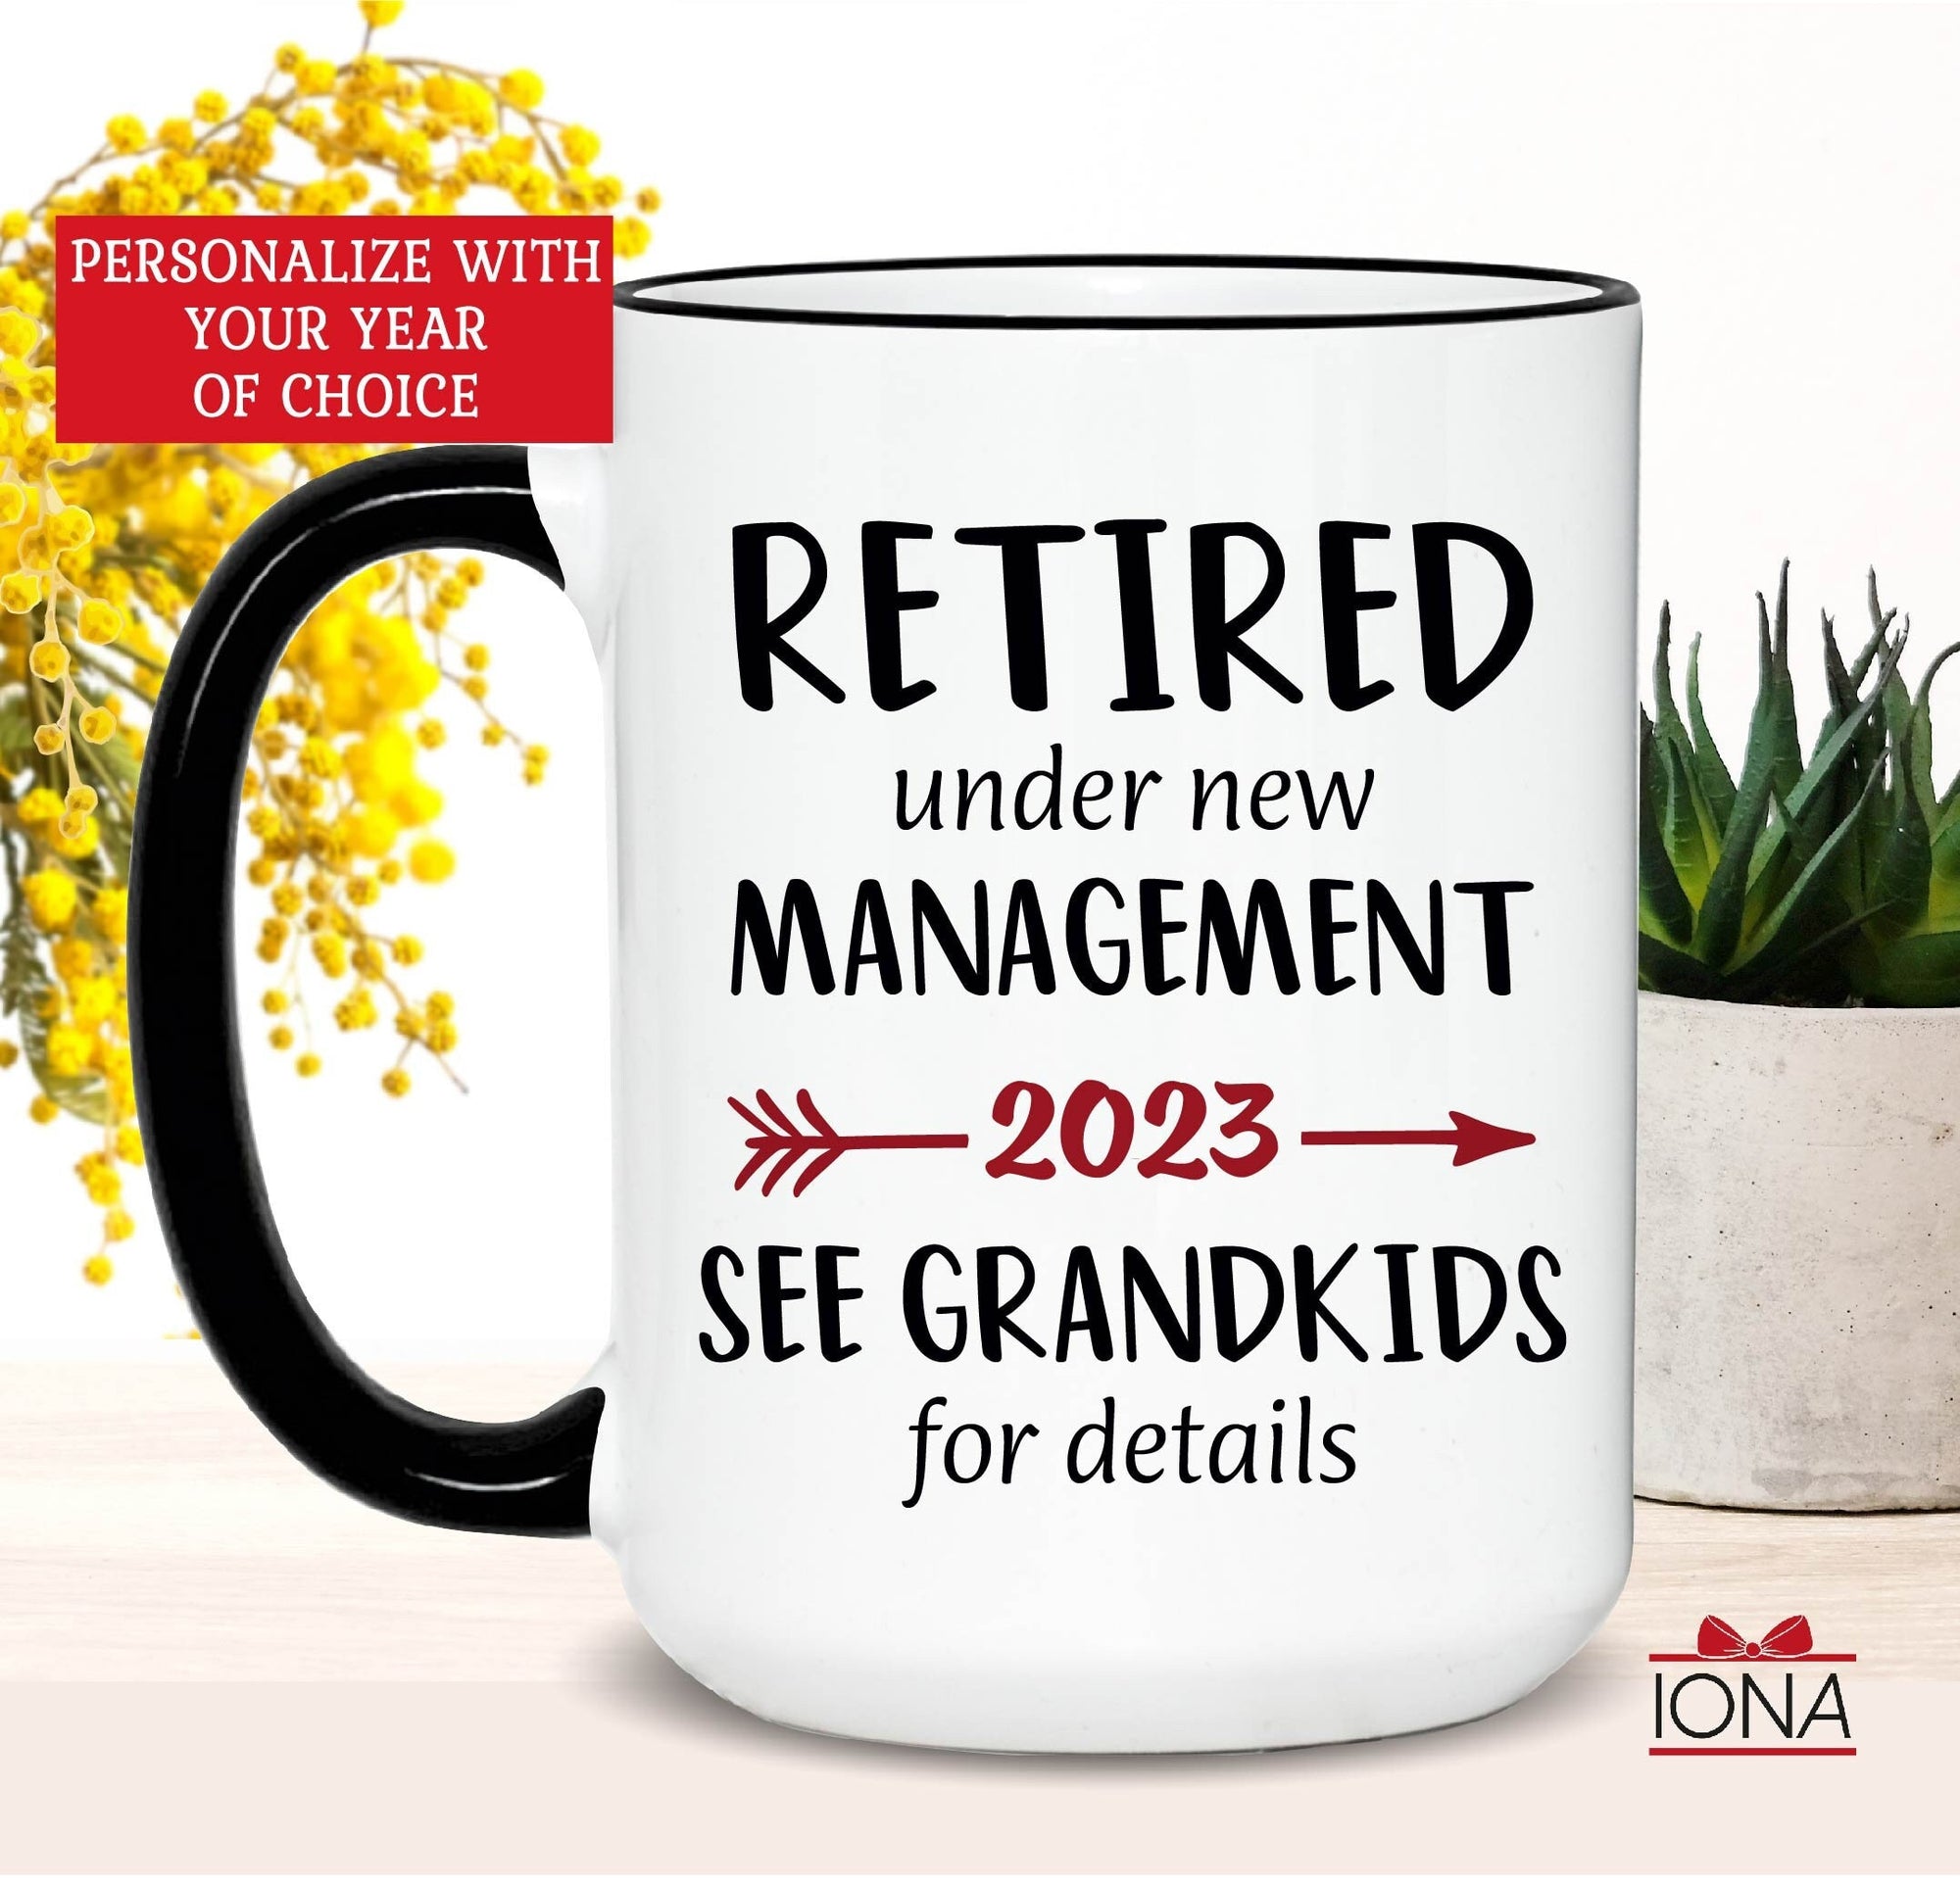 Retirement Gifts for Women, under new management see grandkids, Happy Retirement Gift from Coworkers, Men Retirement Gifts, 2023 Retirement